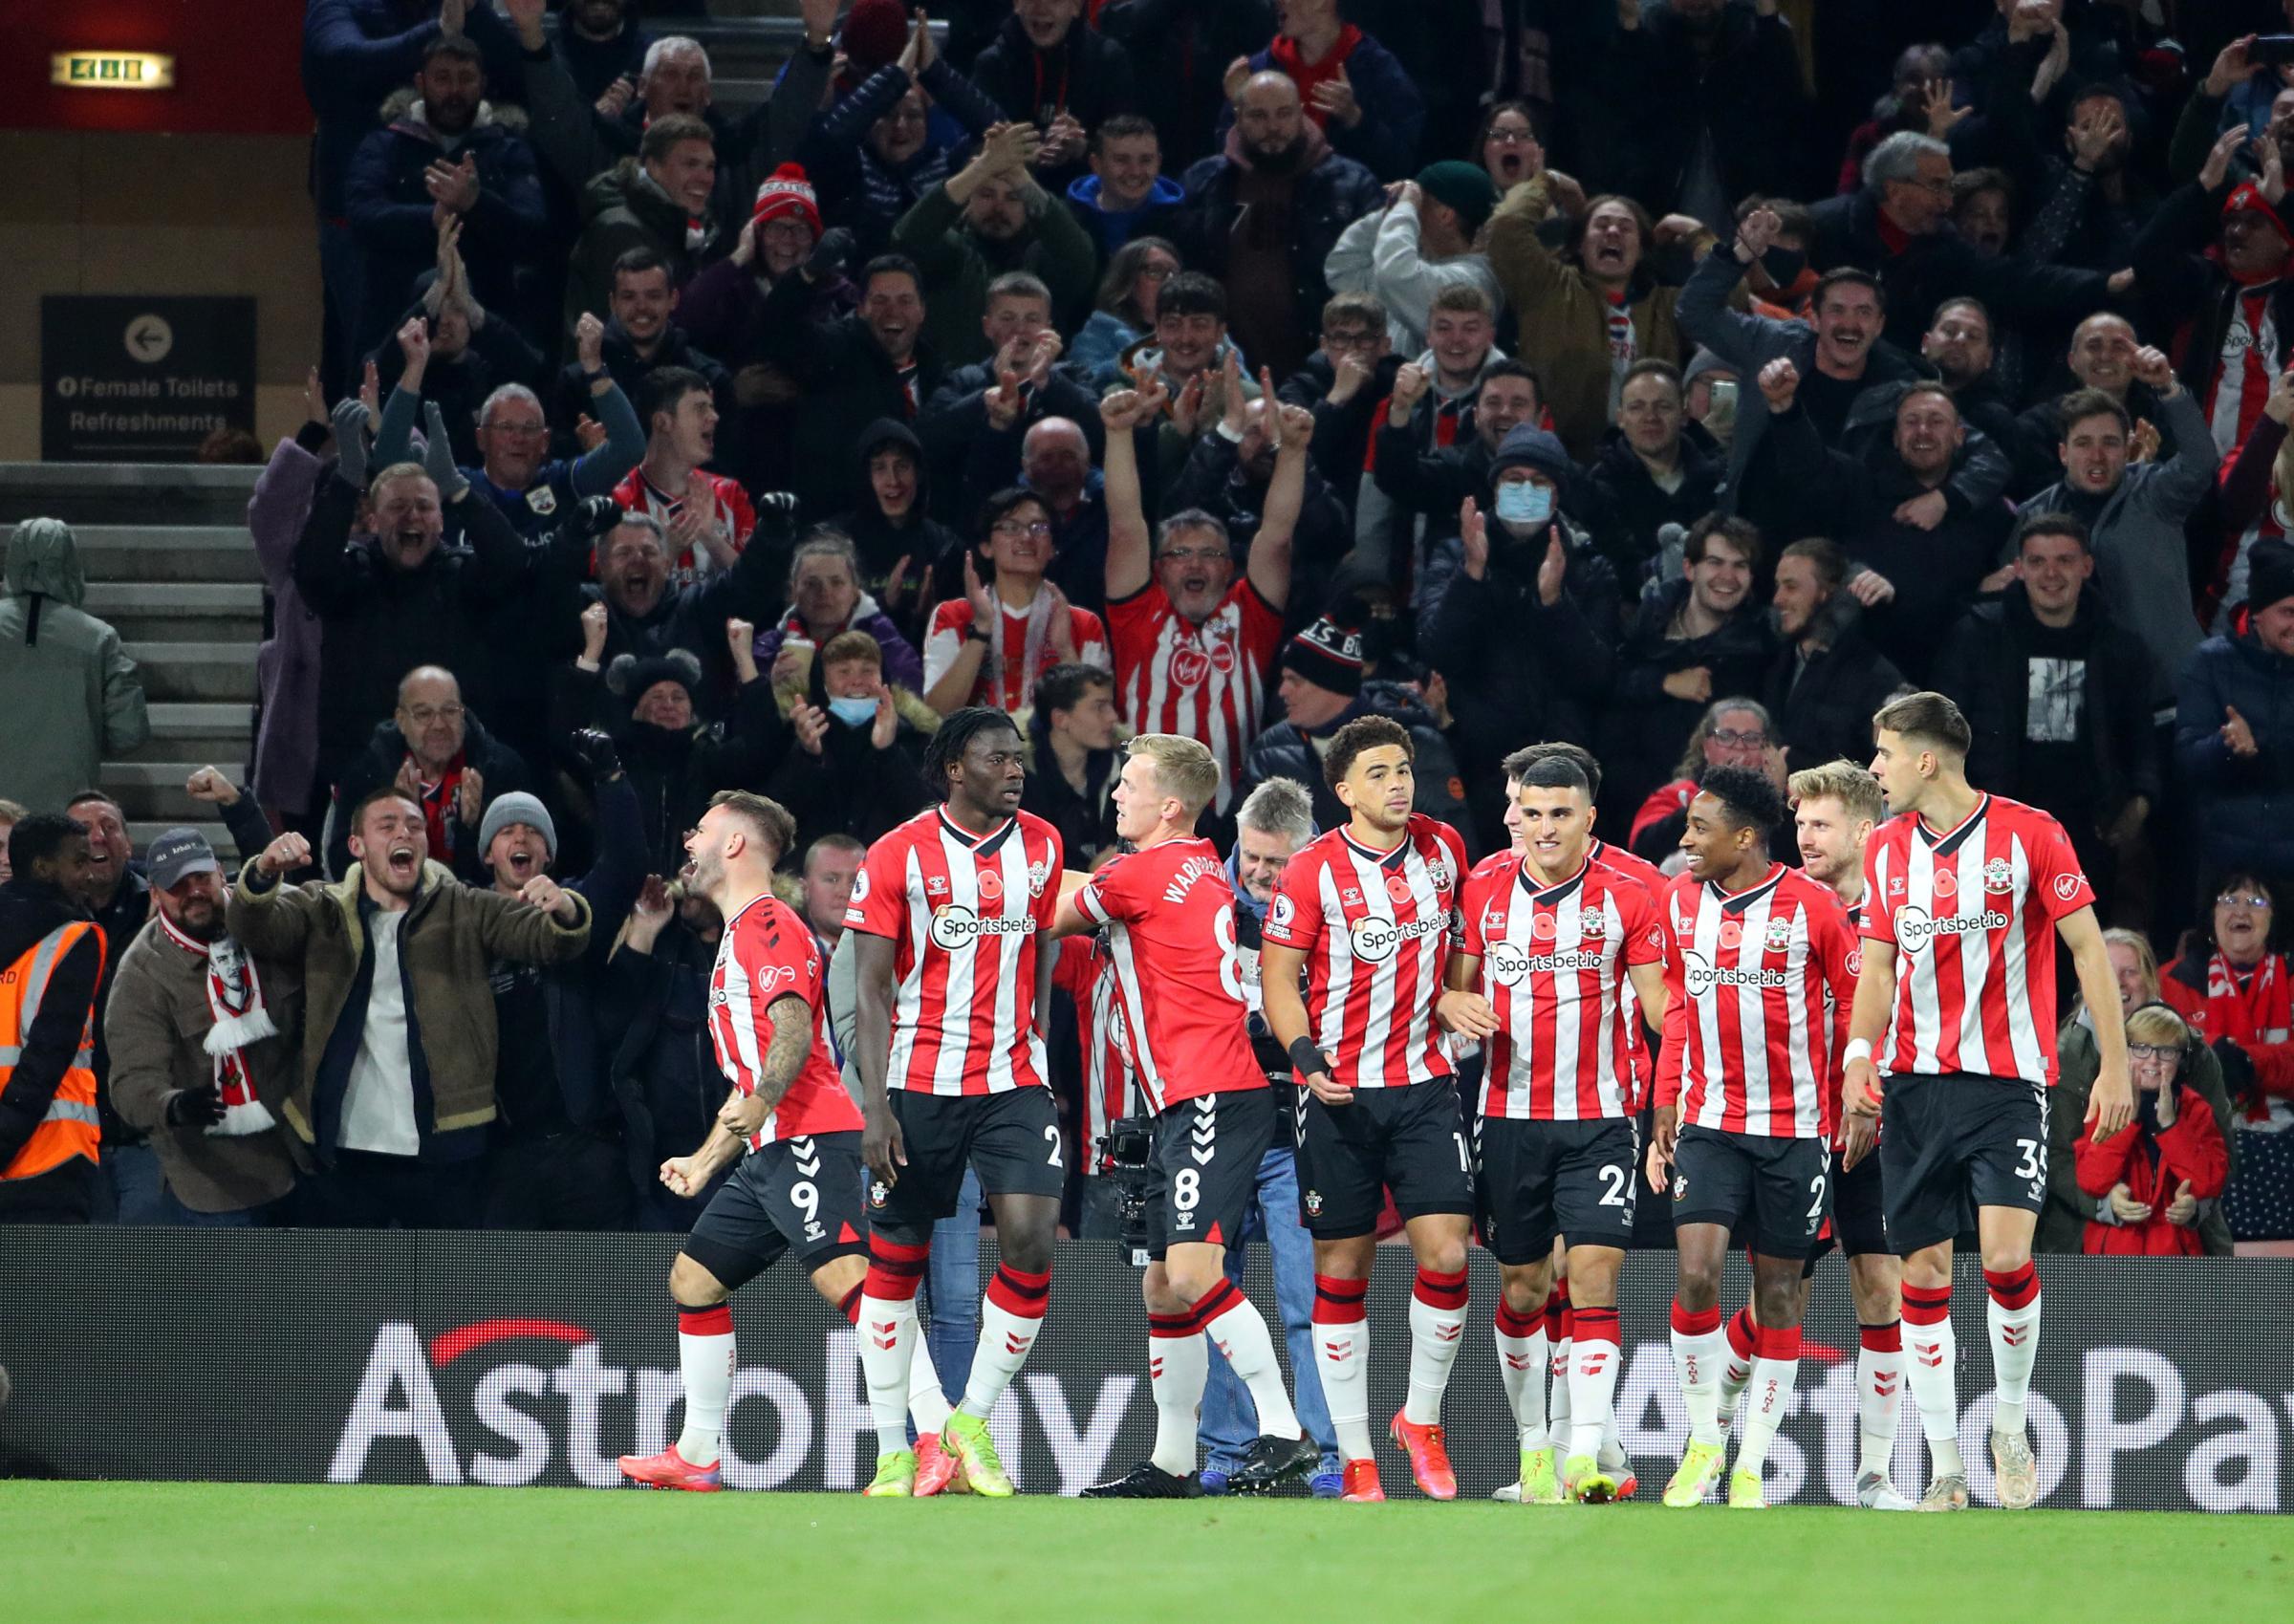 Southampton hold on to 1-0 victory over Aston Villa in EPL